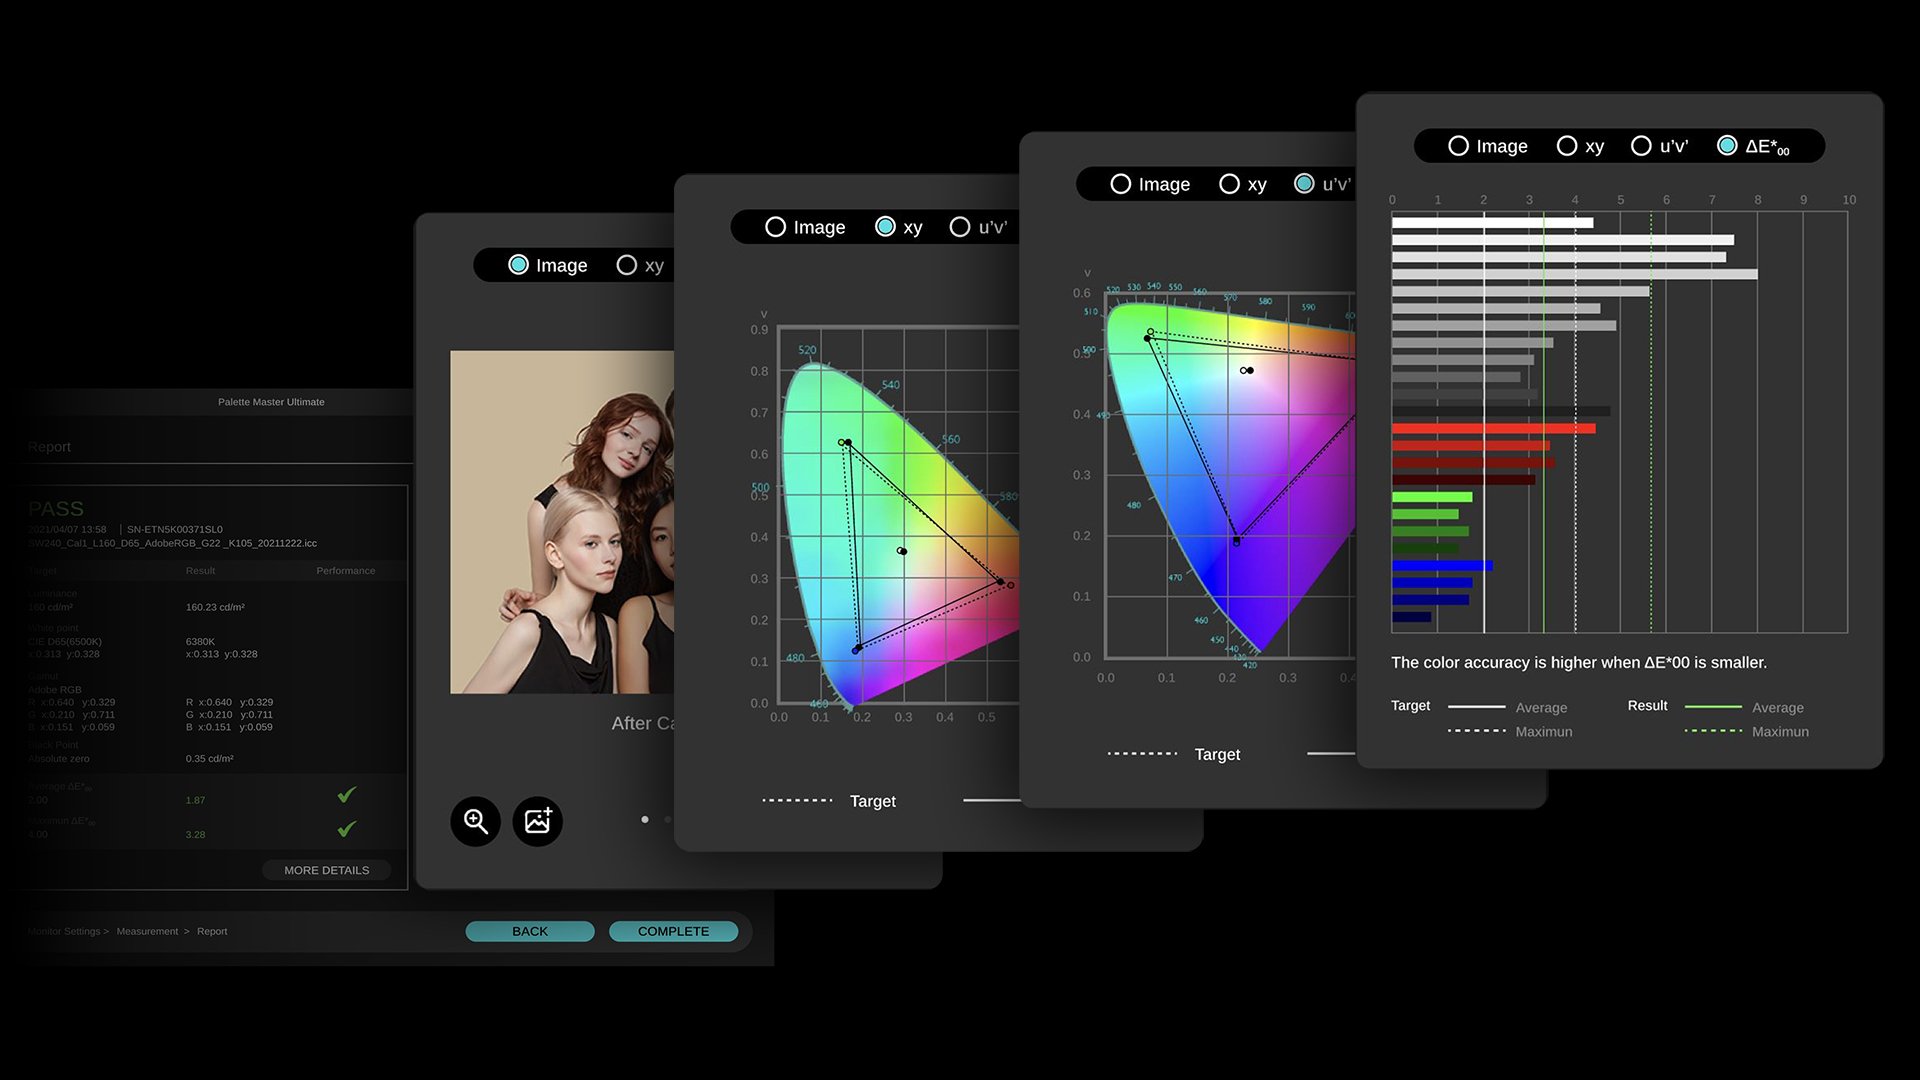 With BenQ Palette Master Ultimate, user can get the concise report and then use the reference images or upload your own images as the benchmark to check the calibration results in various intuitive ways. 